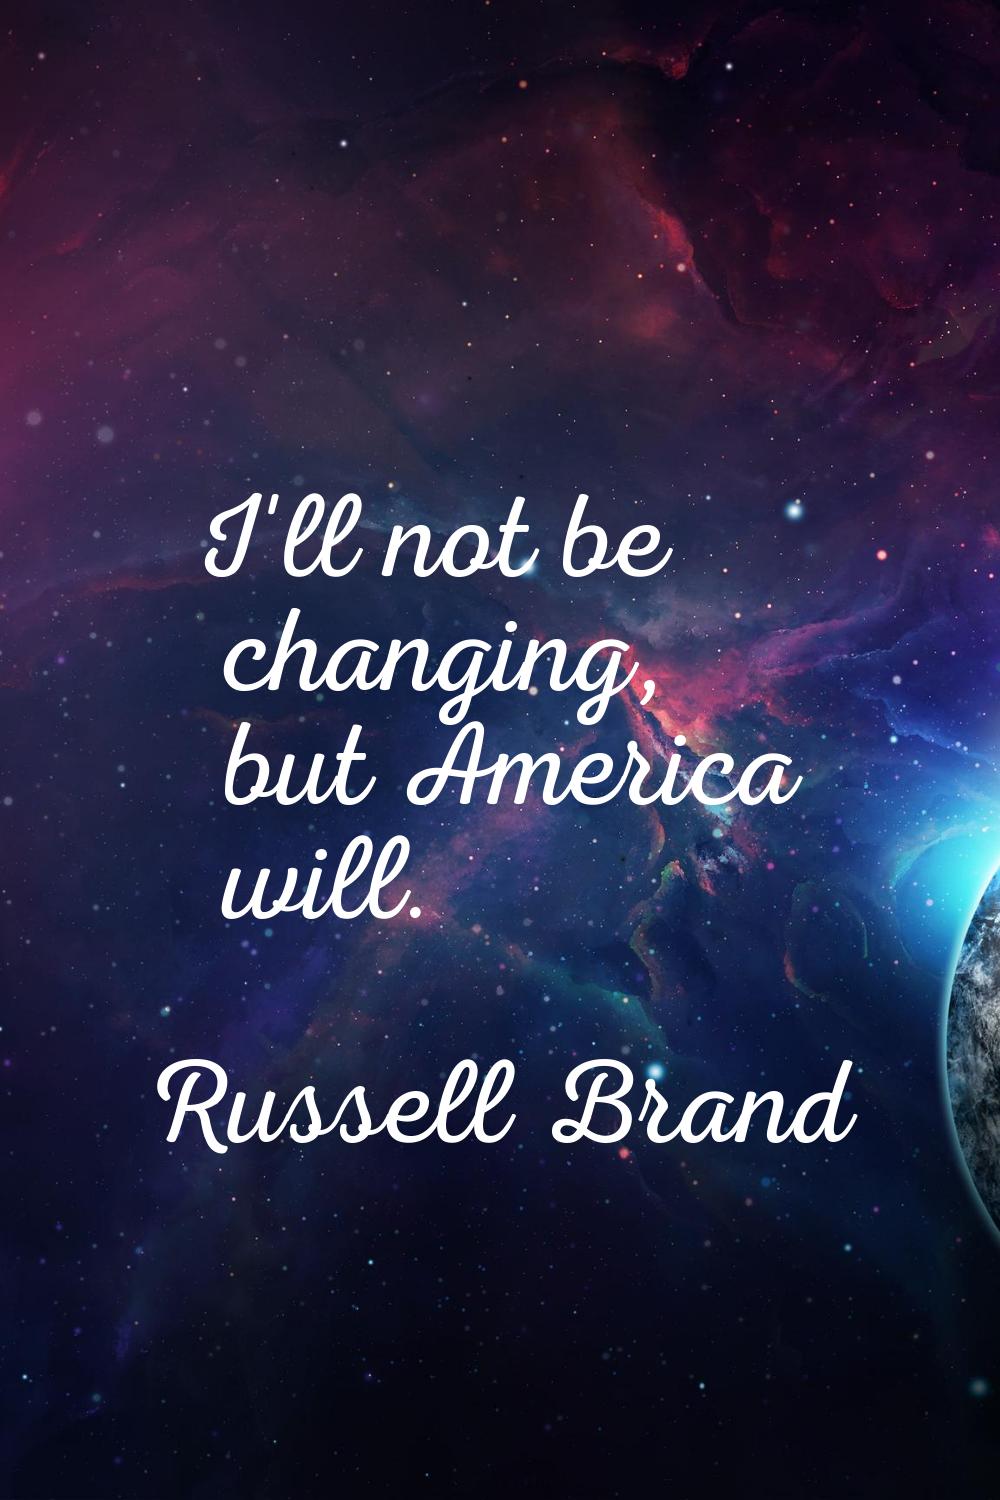 I'll not be changing, but America will.